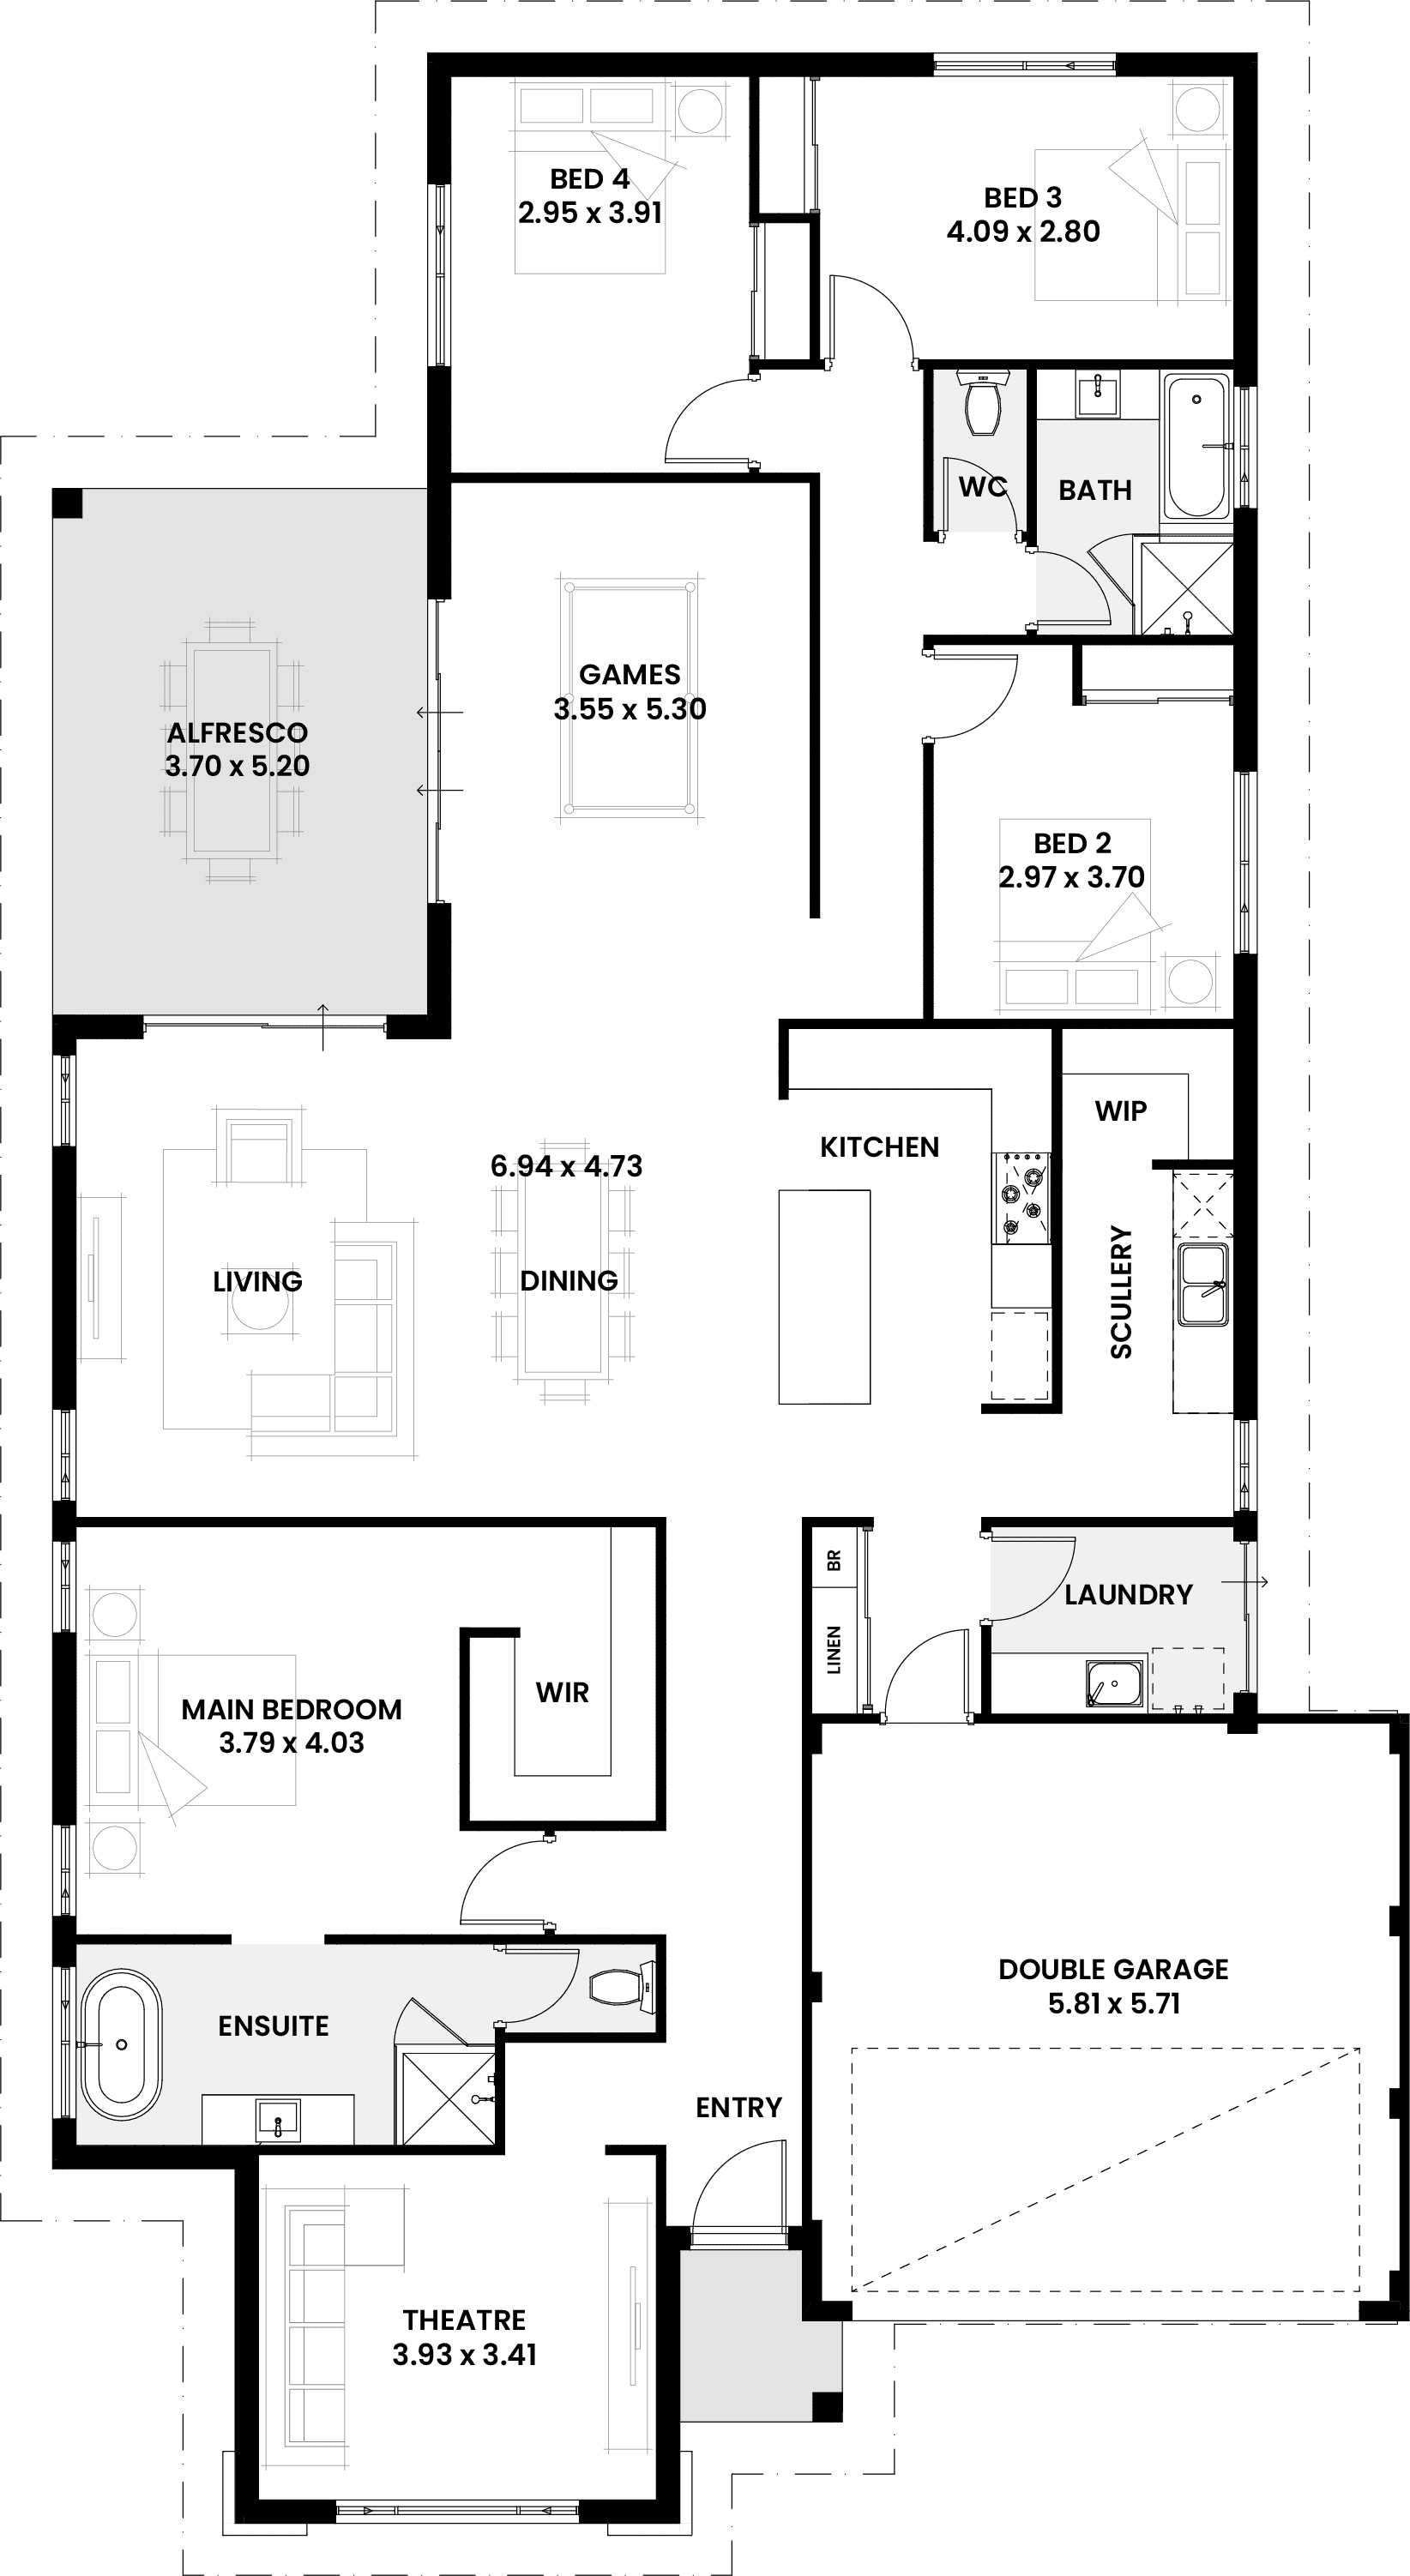 Floorplan for The Cherry, a Move Homes new home design perfect for first time buyers and new builders in Perth